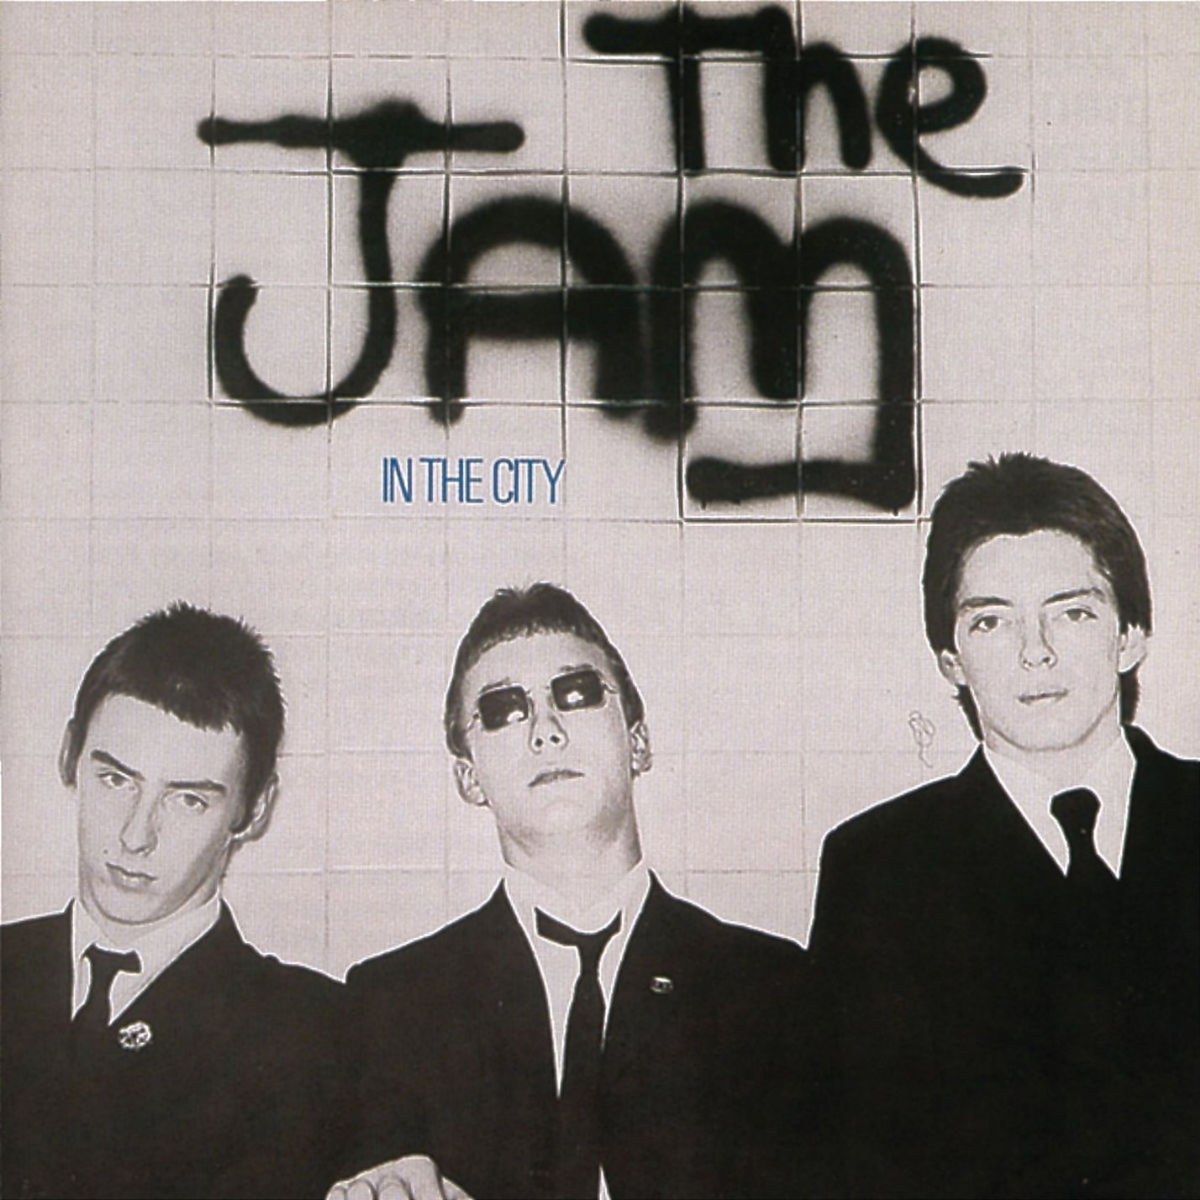 The Jam: Albums Ranked from Worst to Best